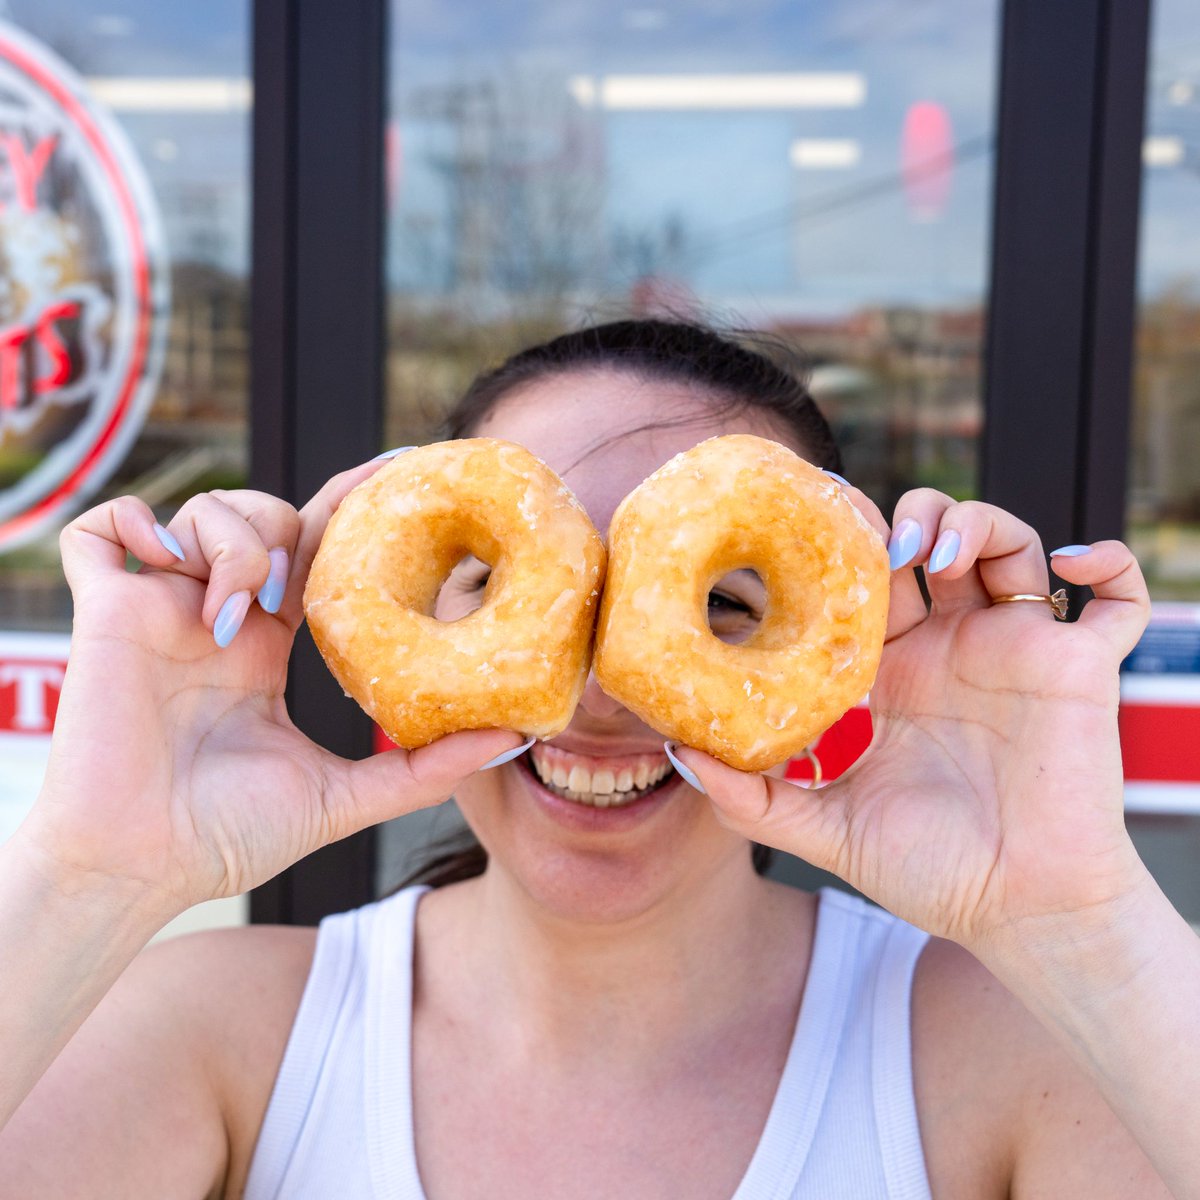 Keep your eyes on the prize! Sign up for DO-HAPPY Rewards and instantly get 2 FREE GLAZED DO-NUTS added to your wallet. 🙌 shipleydonuts.com/rewards